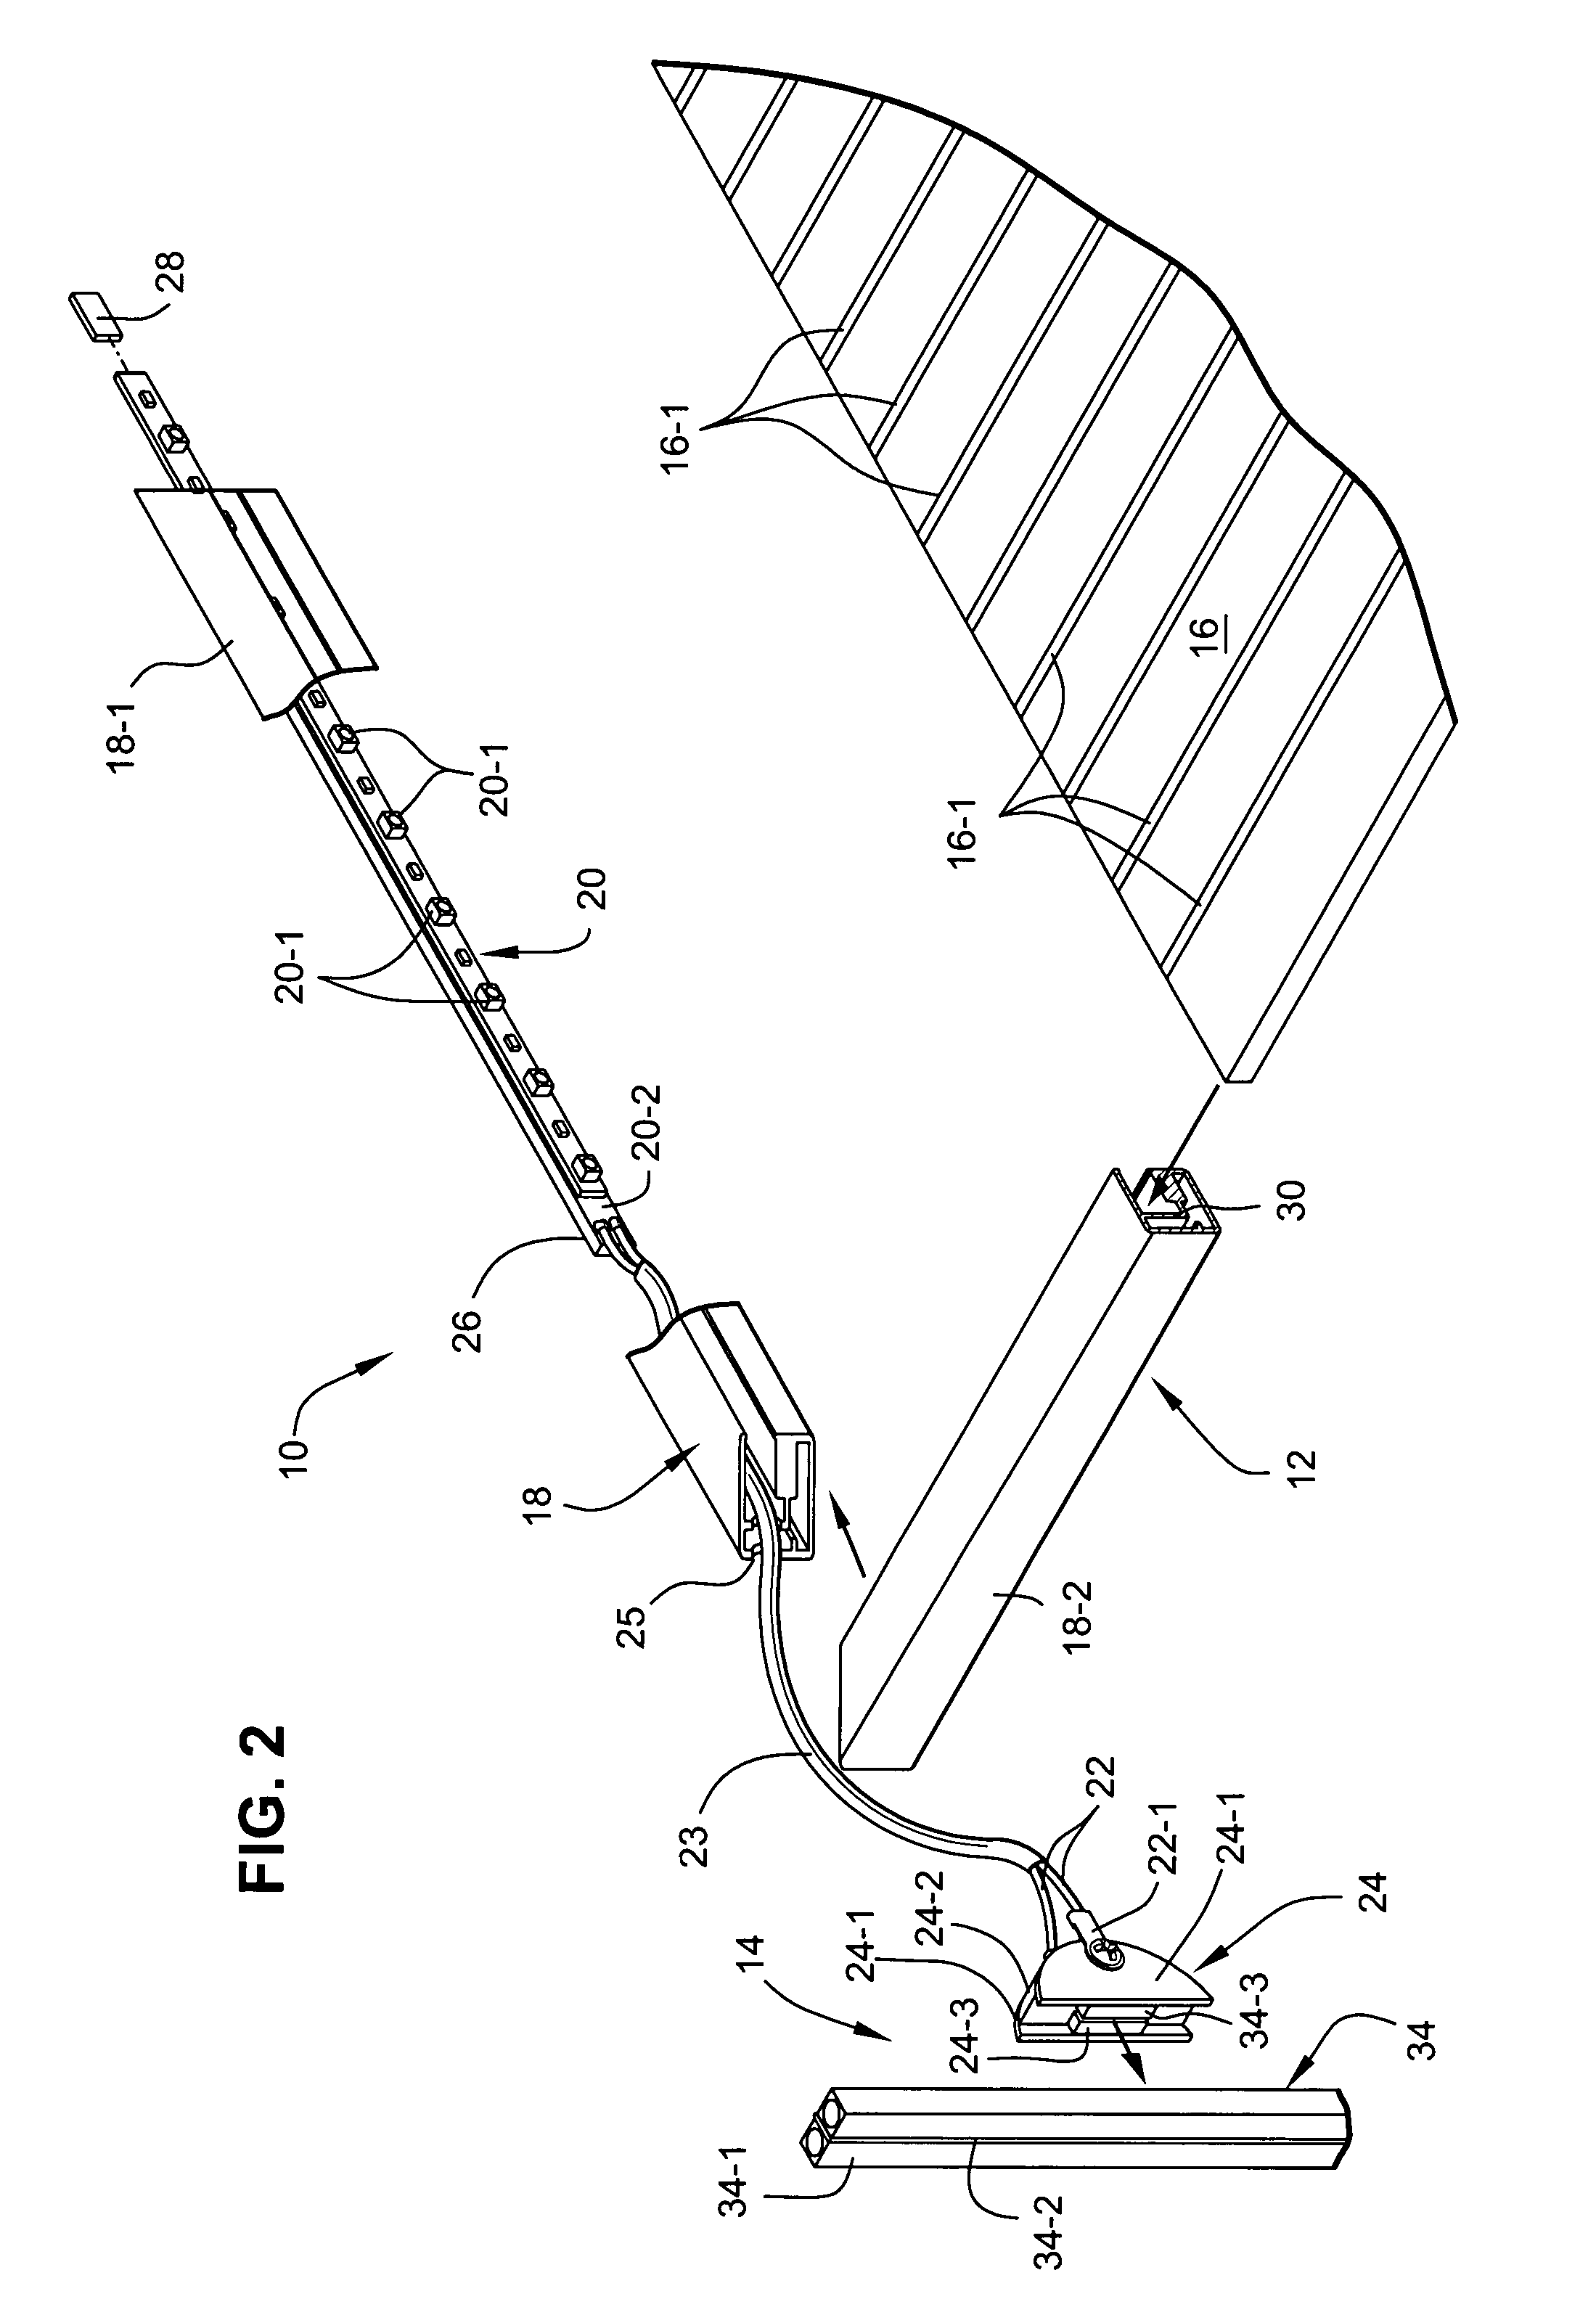 Self-illuminated structural panel units and systems including the same